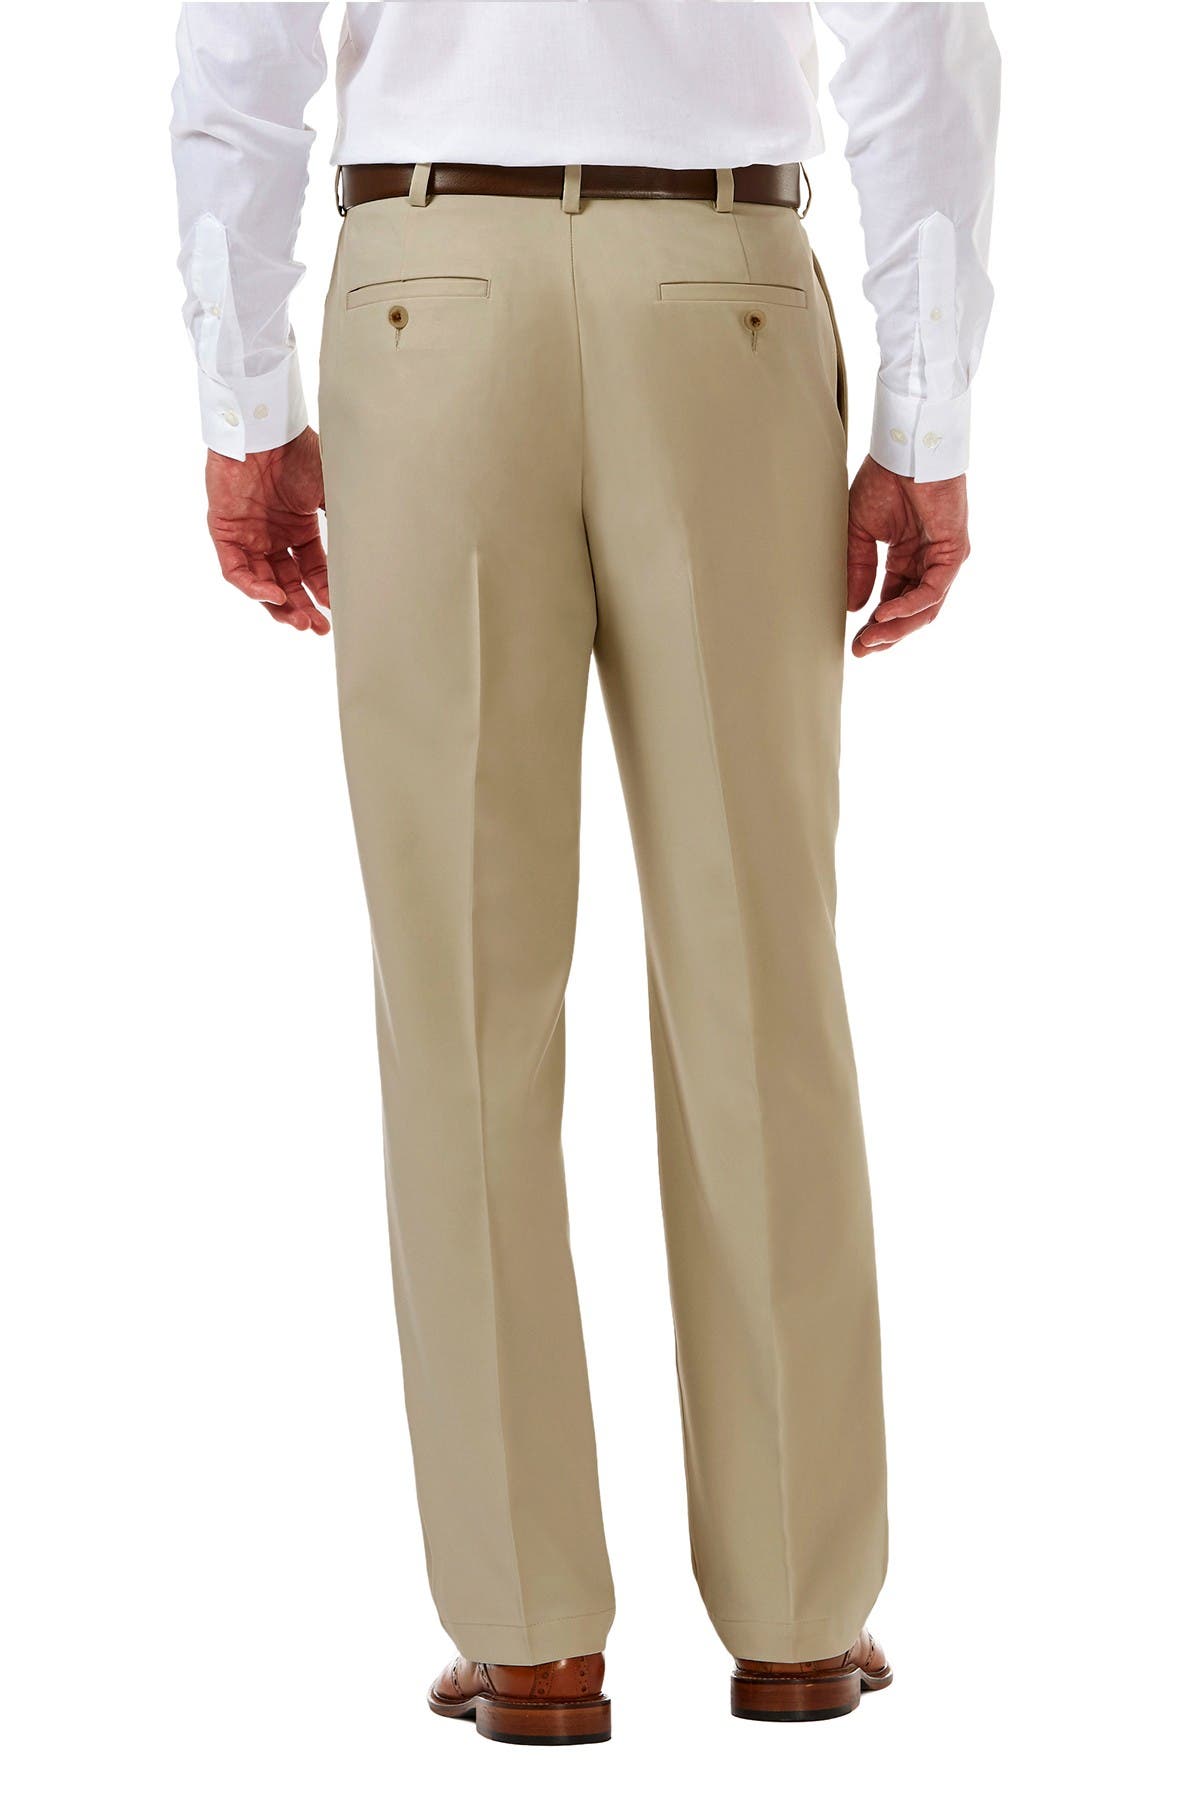 Haggar Cool 18 Pro Classic Fit Pleat Front Pants In Open Beige10